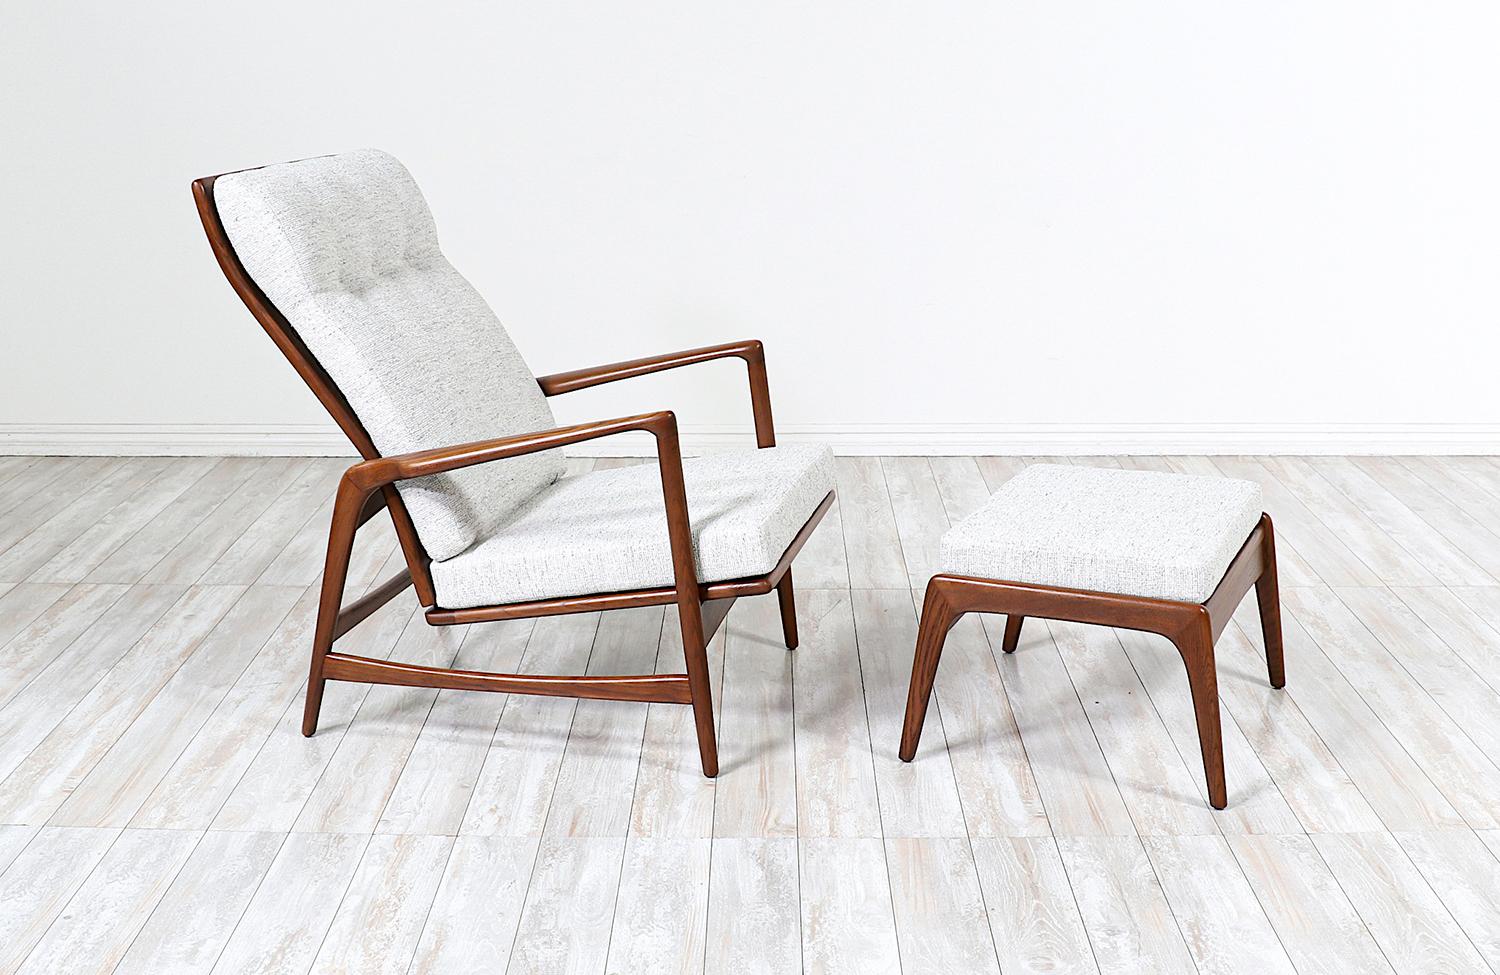 Reclining Lounge Chair with ottoman designed by Ib Kofod-Larsen for Selig in Denmark circa 1950’s. This attractive newly restored Danish Modern design features a walnut-stained oak wood frame with sculpted and angled armrests. With a sculpted back,